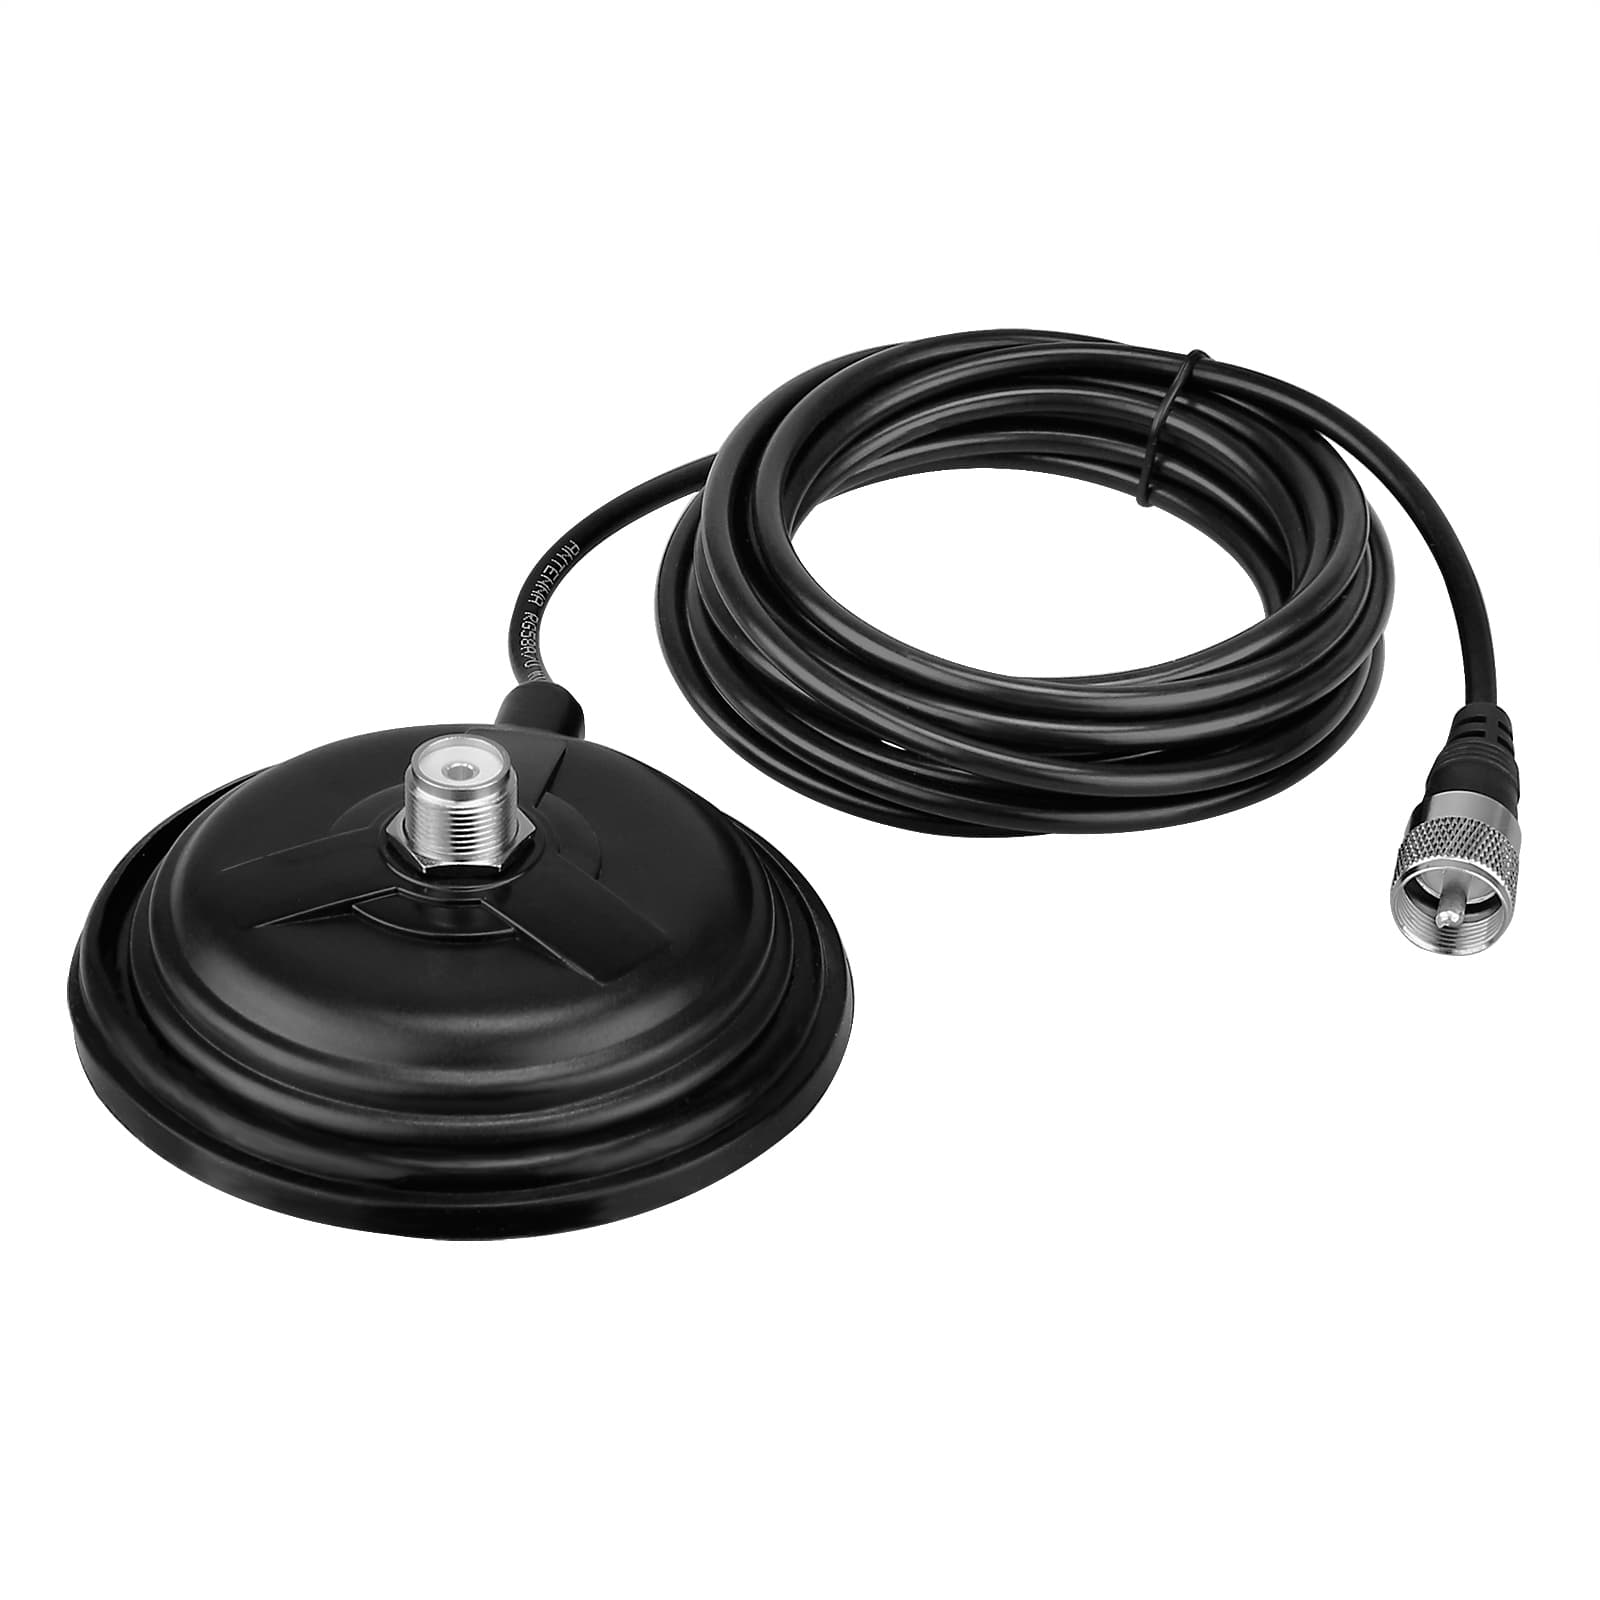 Magnetic Base with Coaxial Cable for Vehicle Antenna